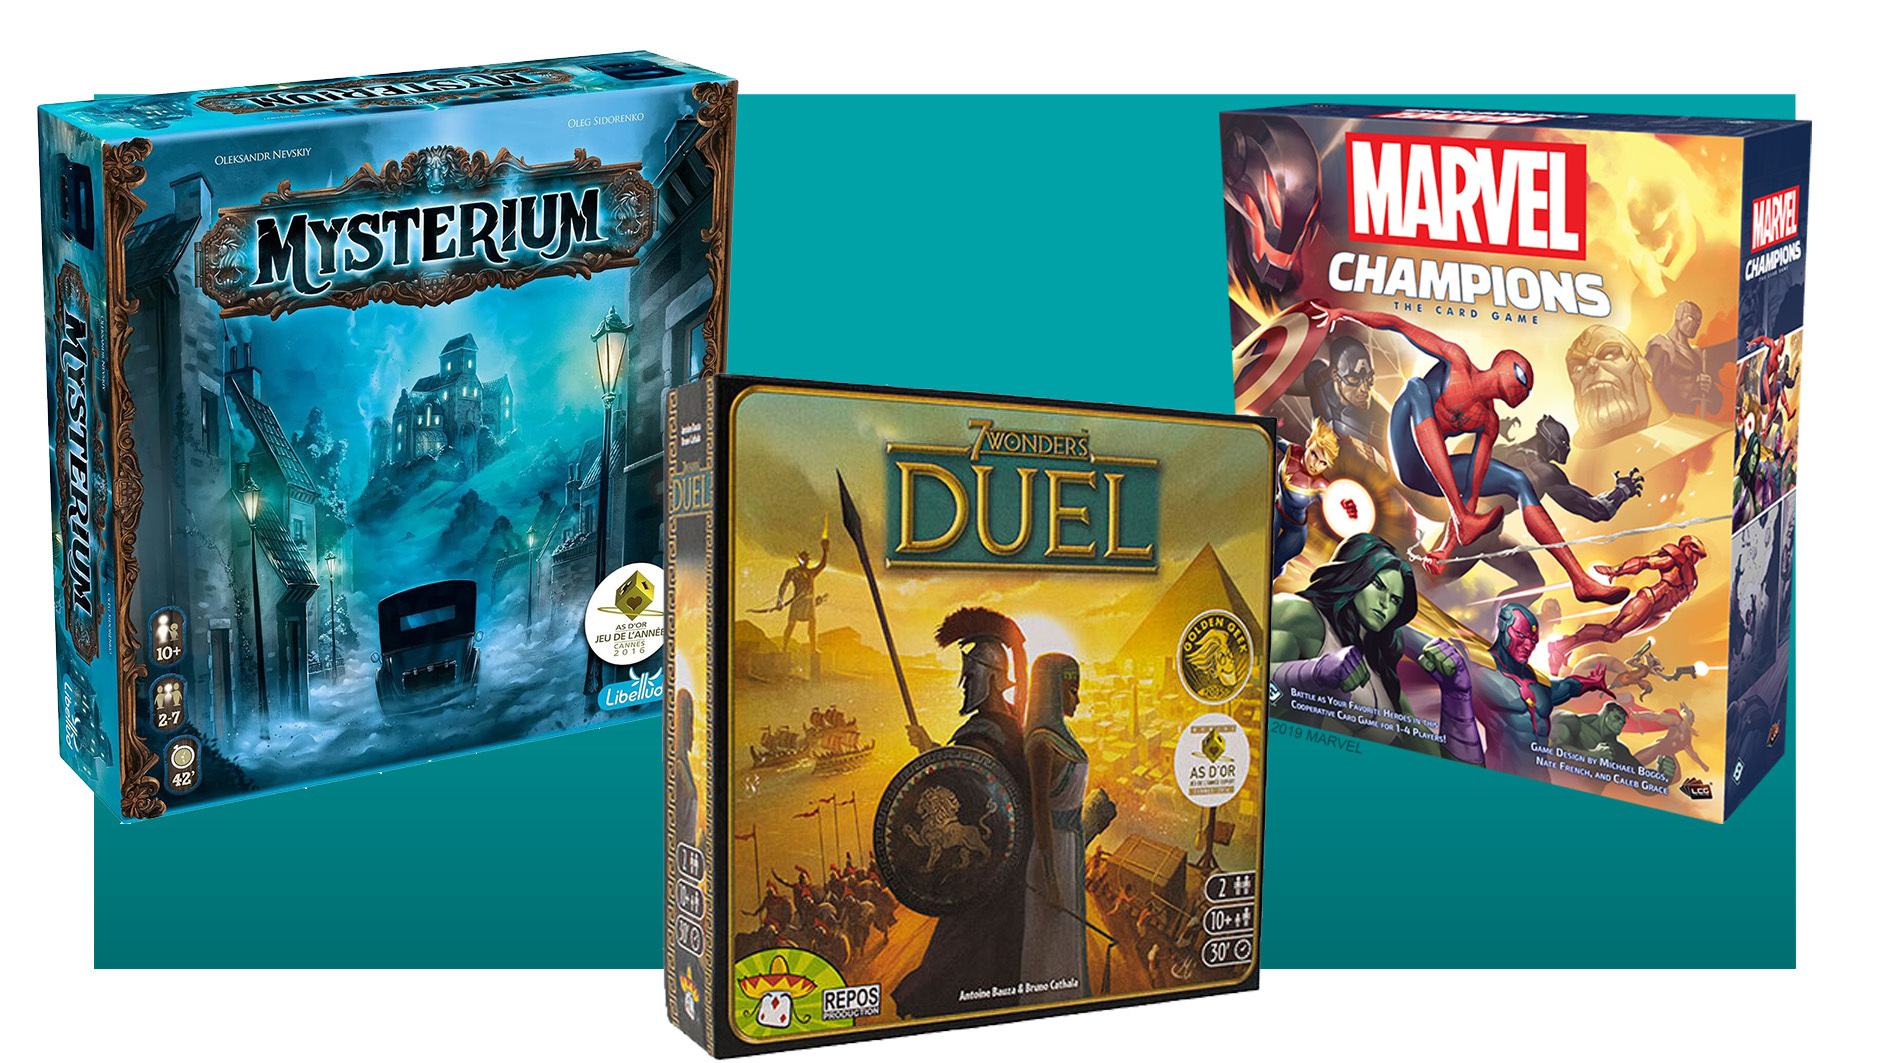  As an unrepentant tabletop obsessive, I reckon these are the 5 coolest board game deals in this year's Prime Day sale  